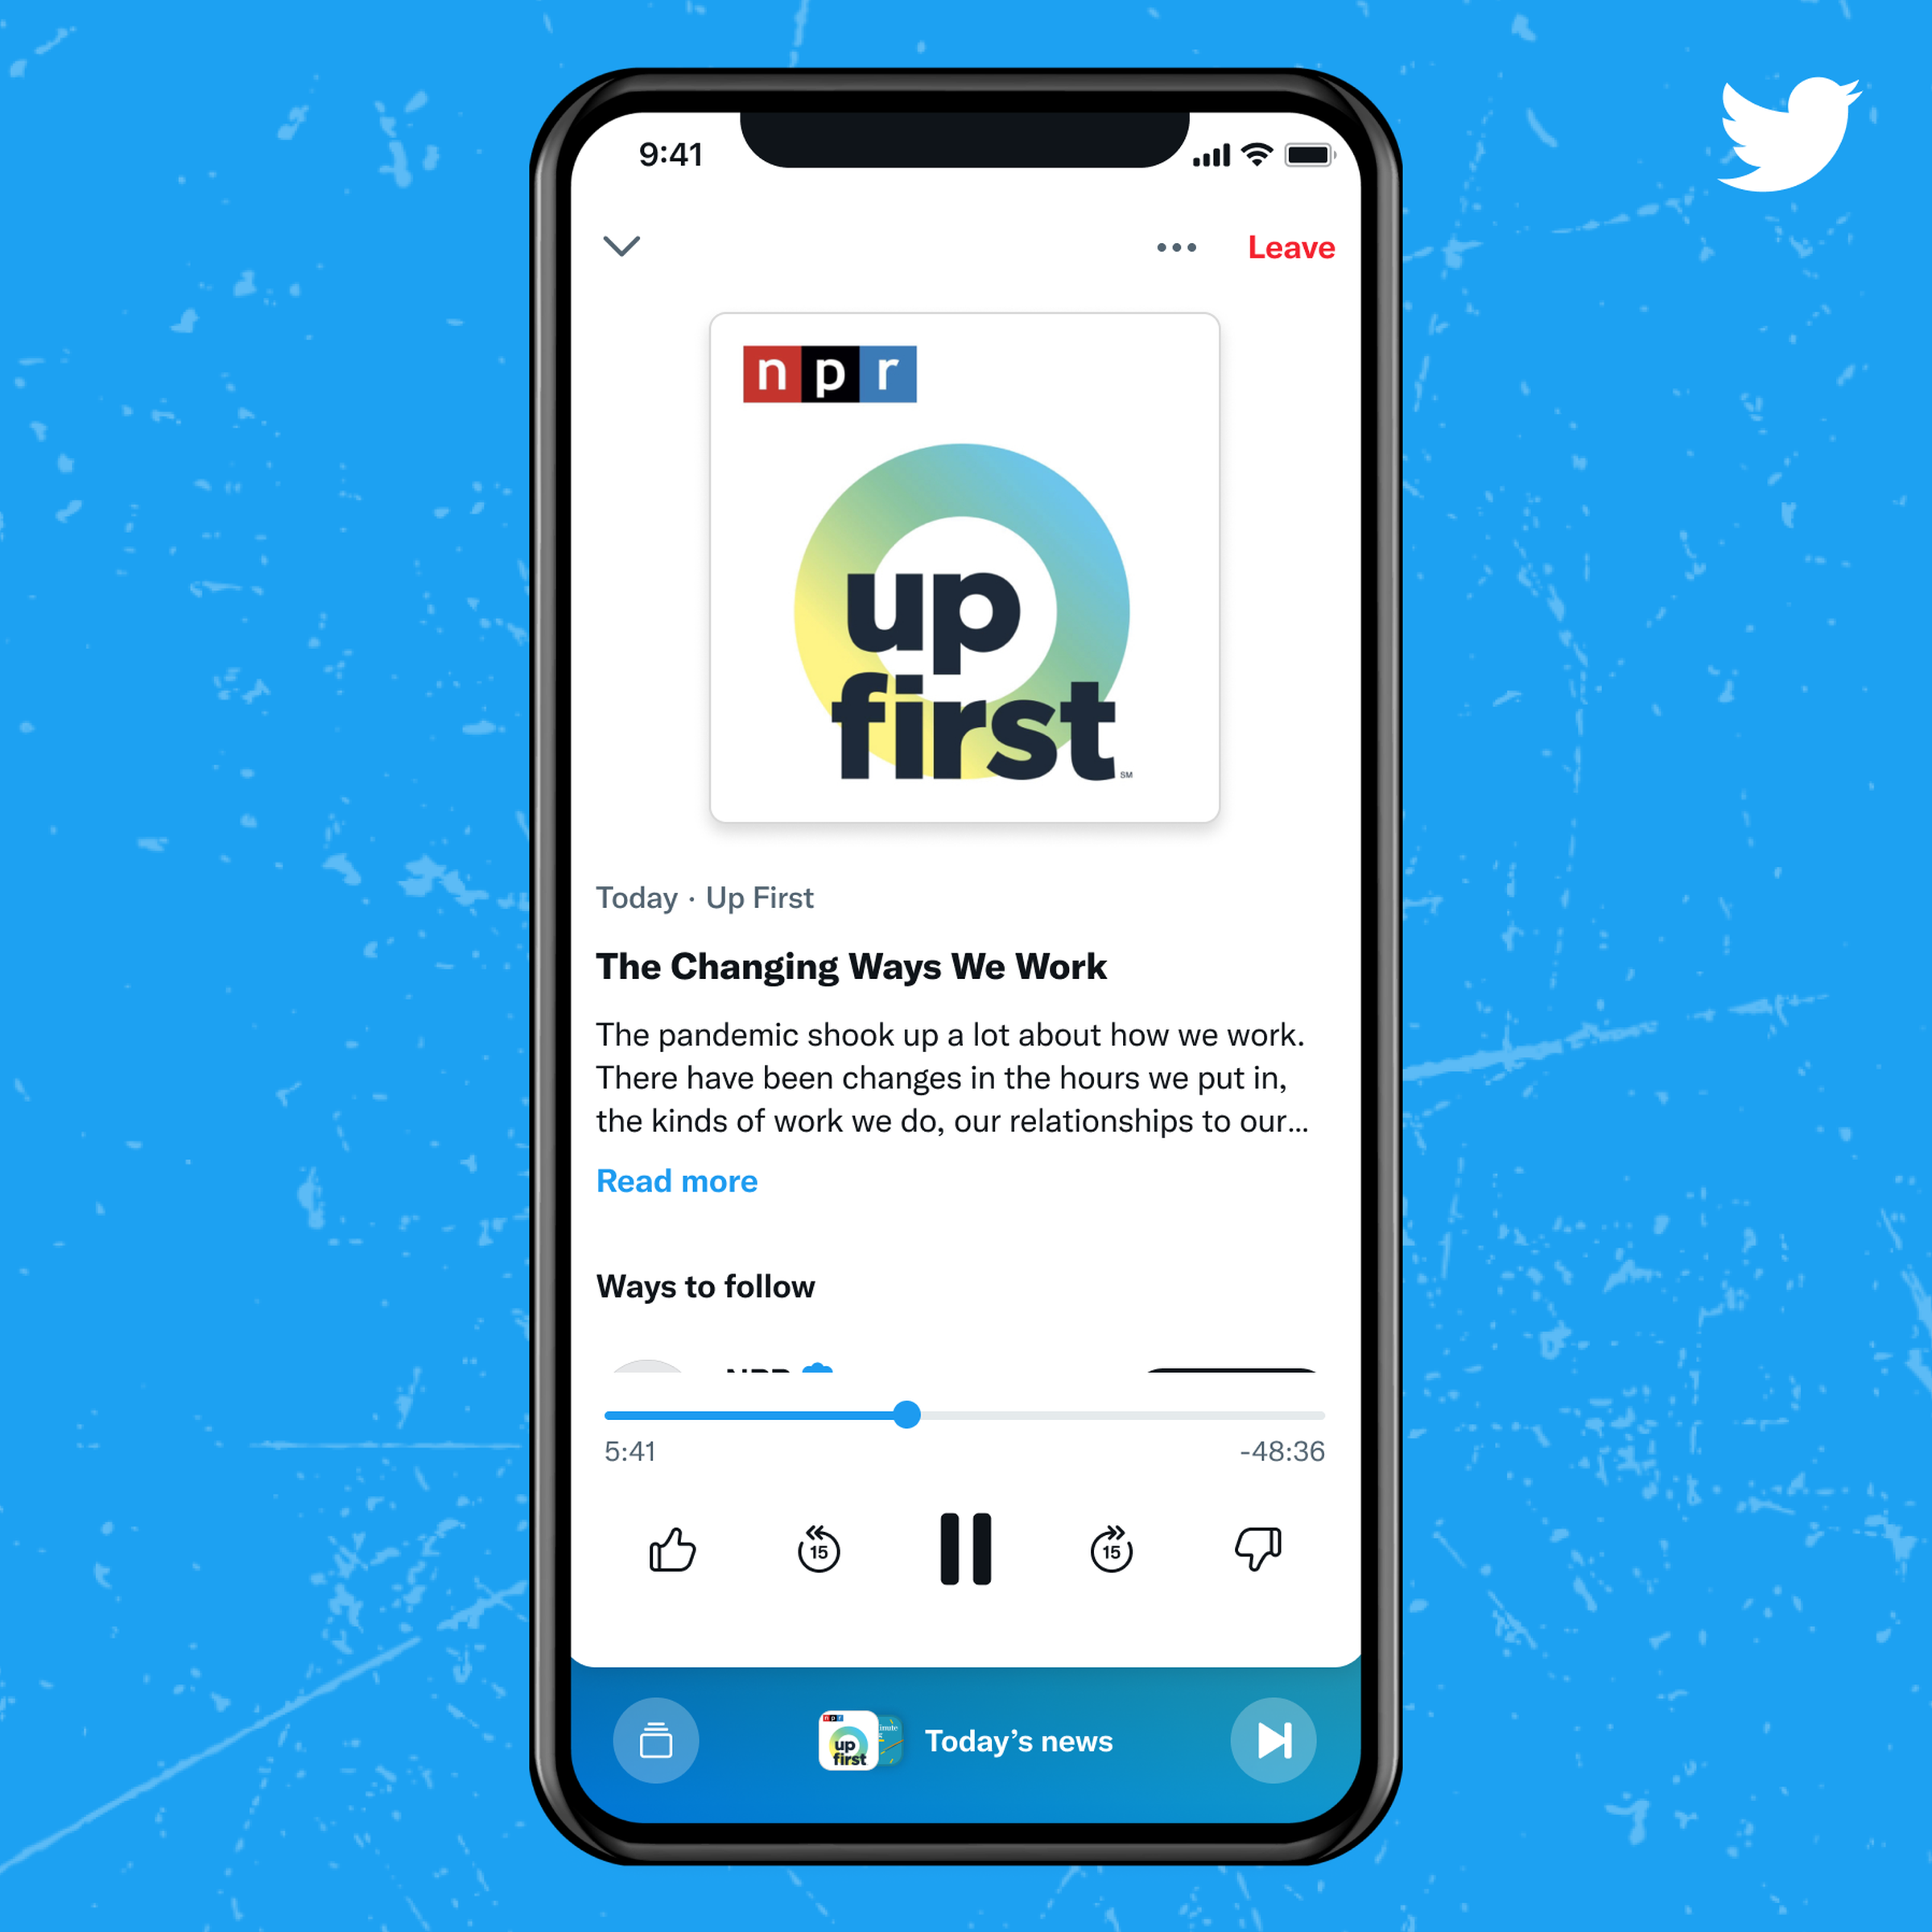 Twitter’s podcast interface on an iPhone.